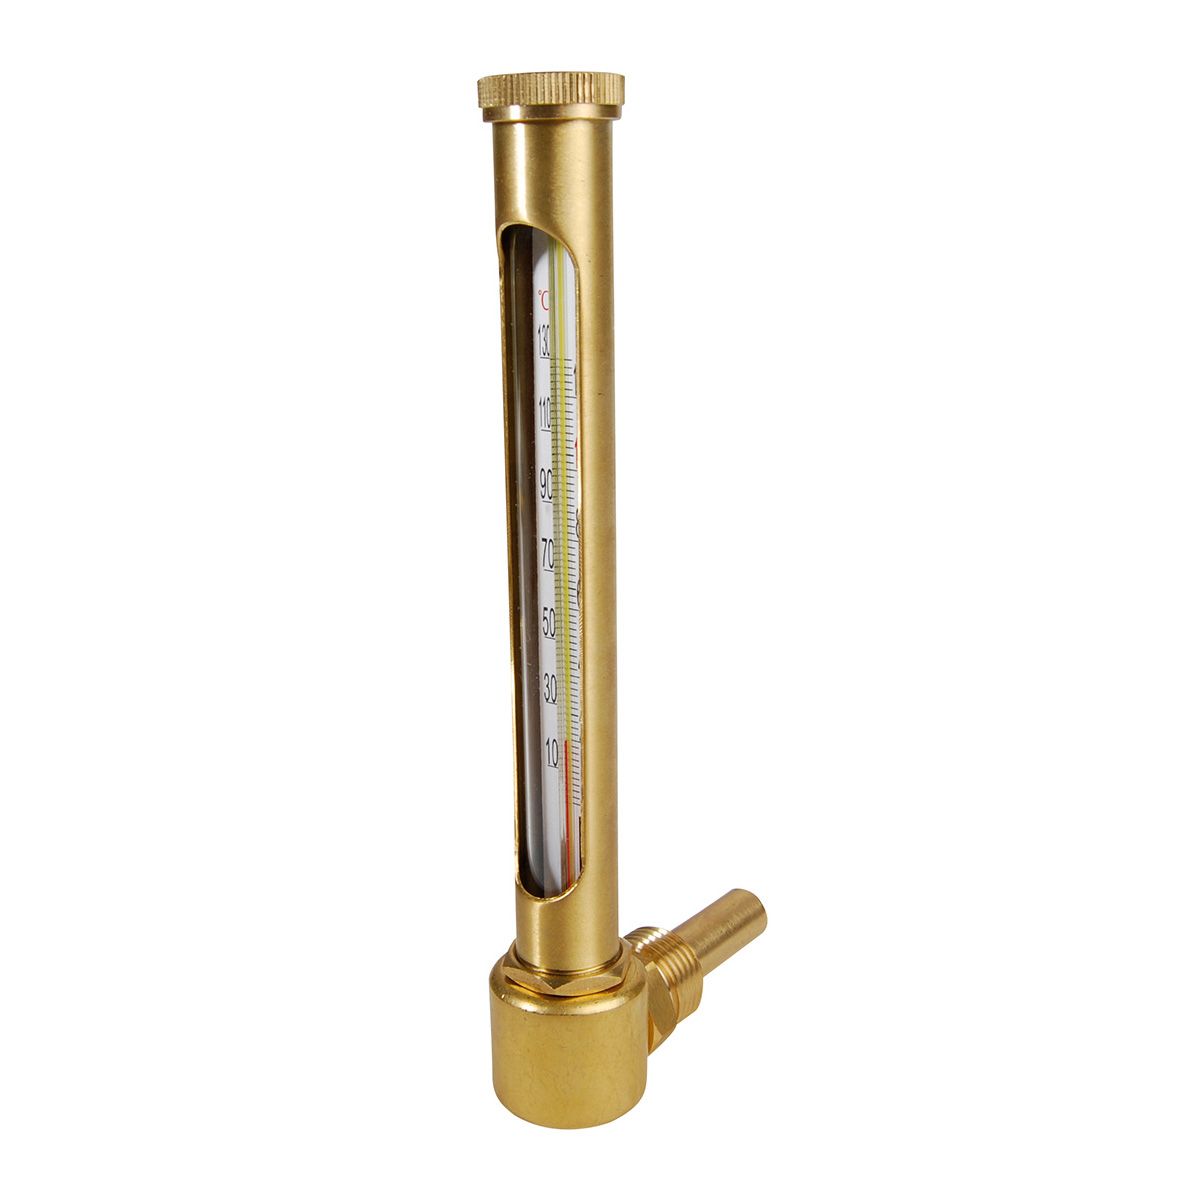 THERMOMETRE CHAUFFAGE EQUERRE A LIQUIDE ROUGE PLONGE 60 MM CGR